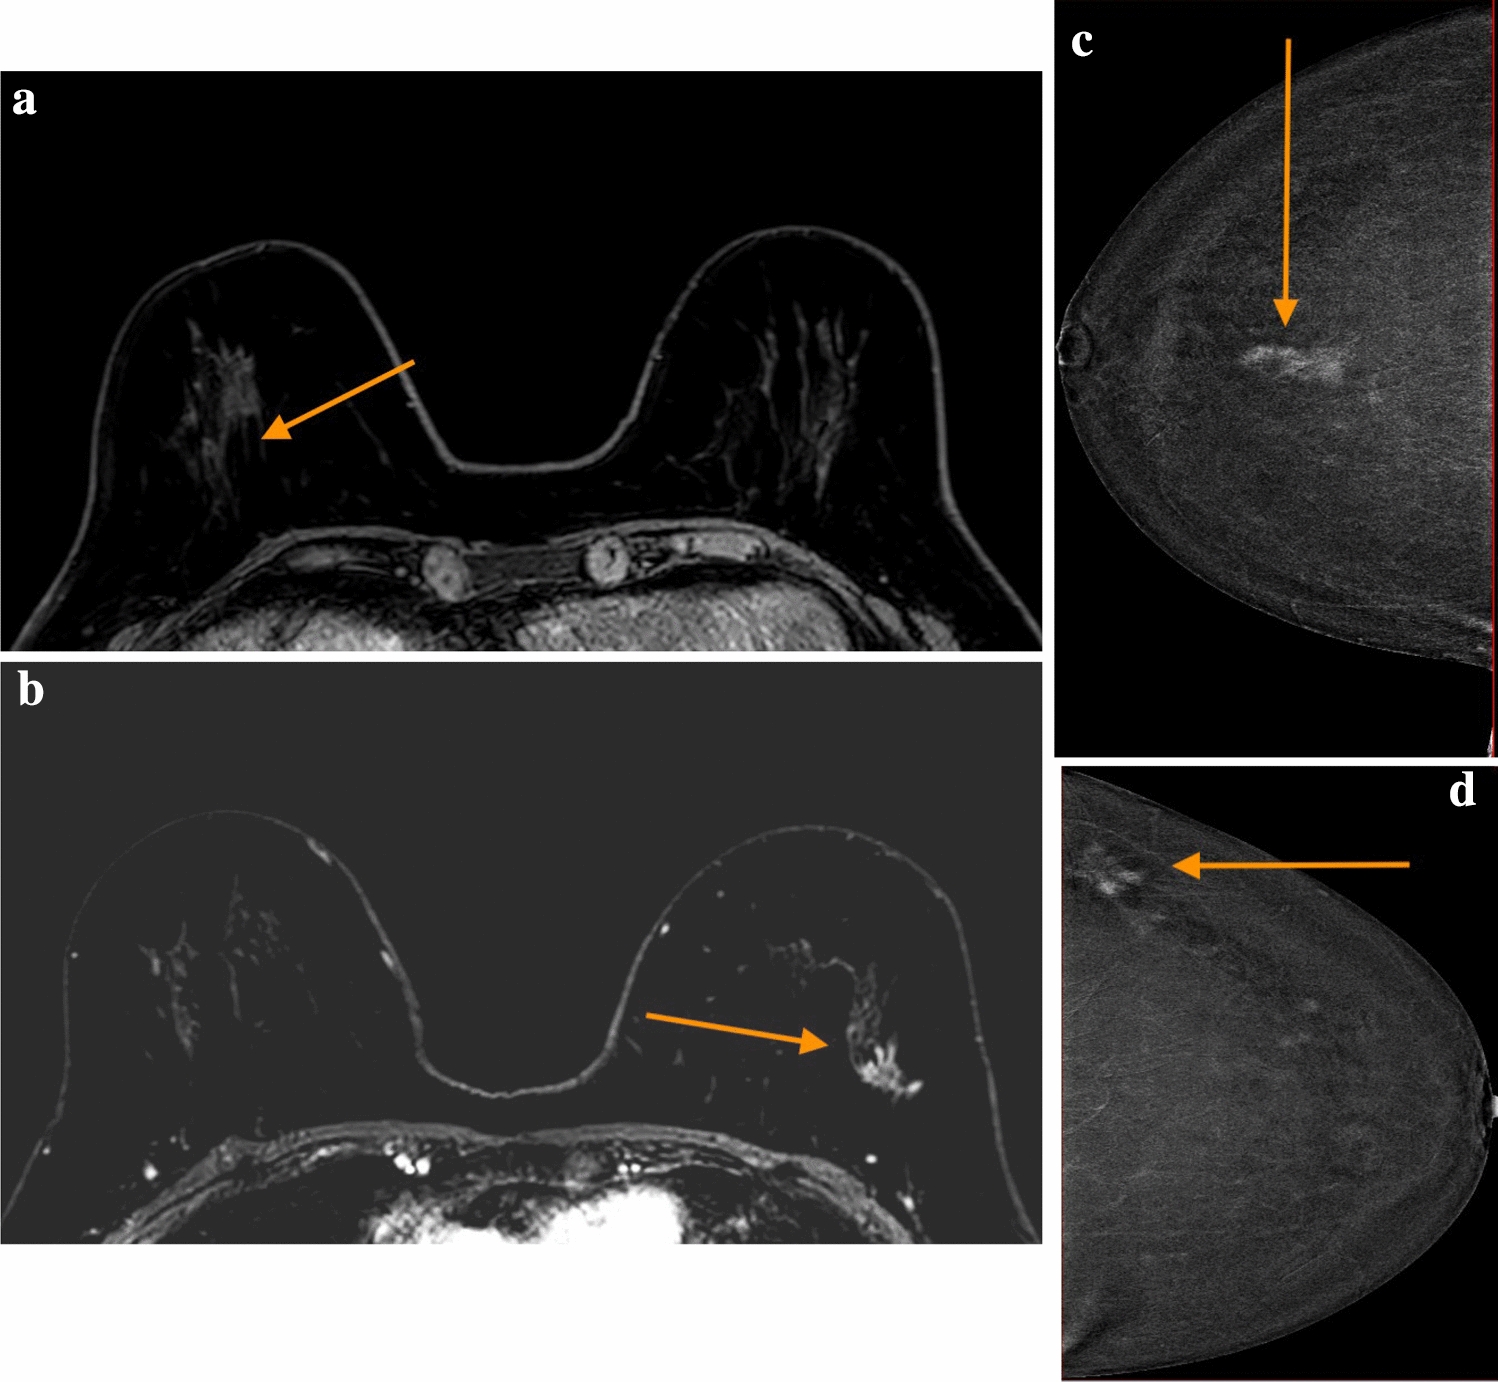 Locoregional staging of breast cancer: contrast-enhanced mammography versus breast magnetic resonance imaging